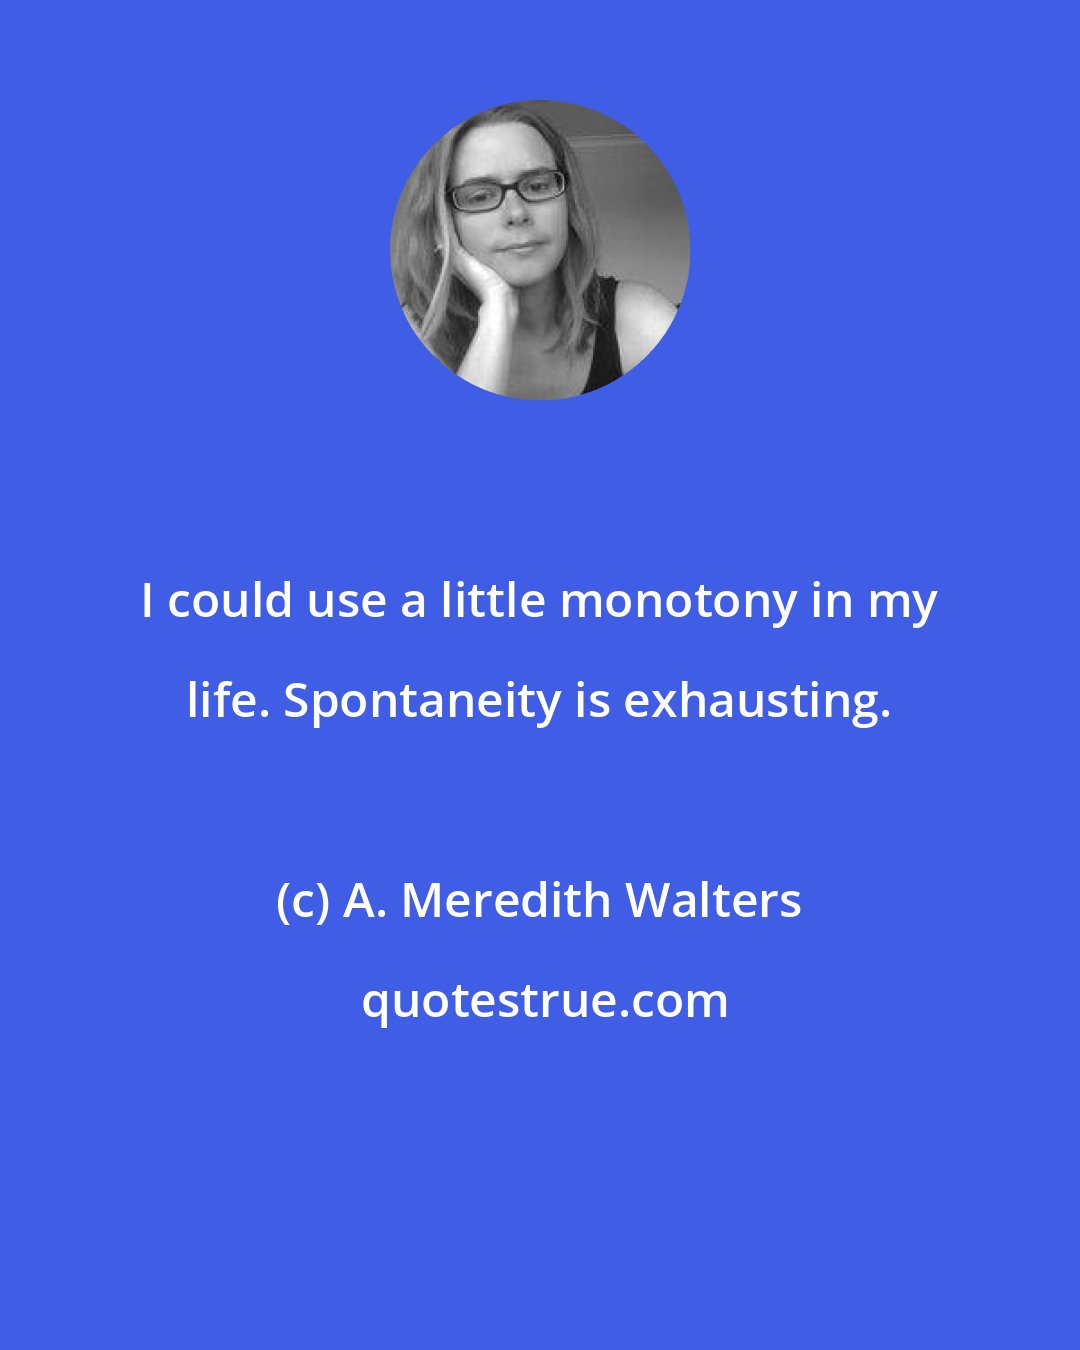 A. Meredith Walters: I could use a little monotony in my life. Spontaneity is exhausting.